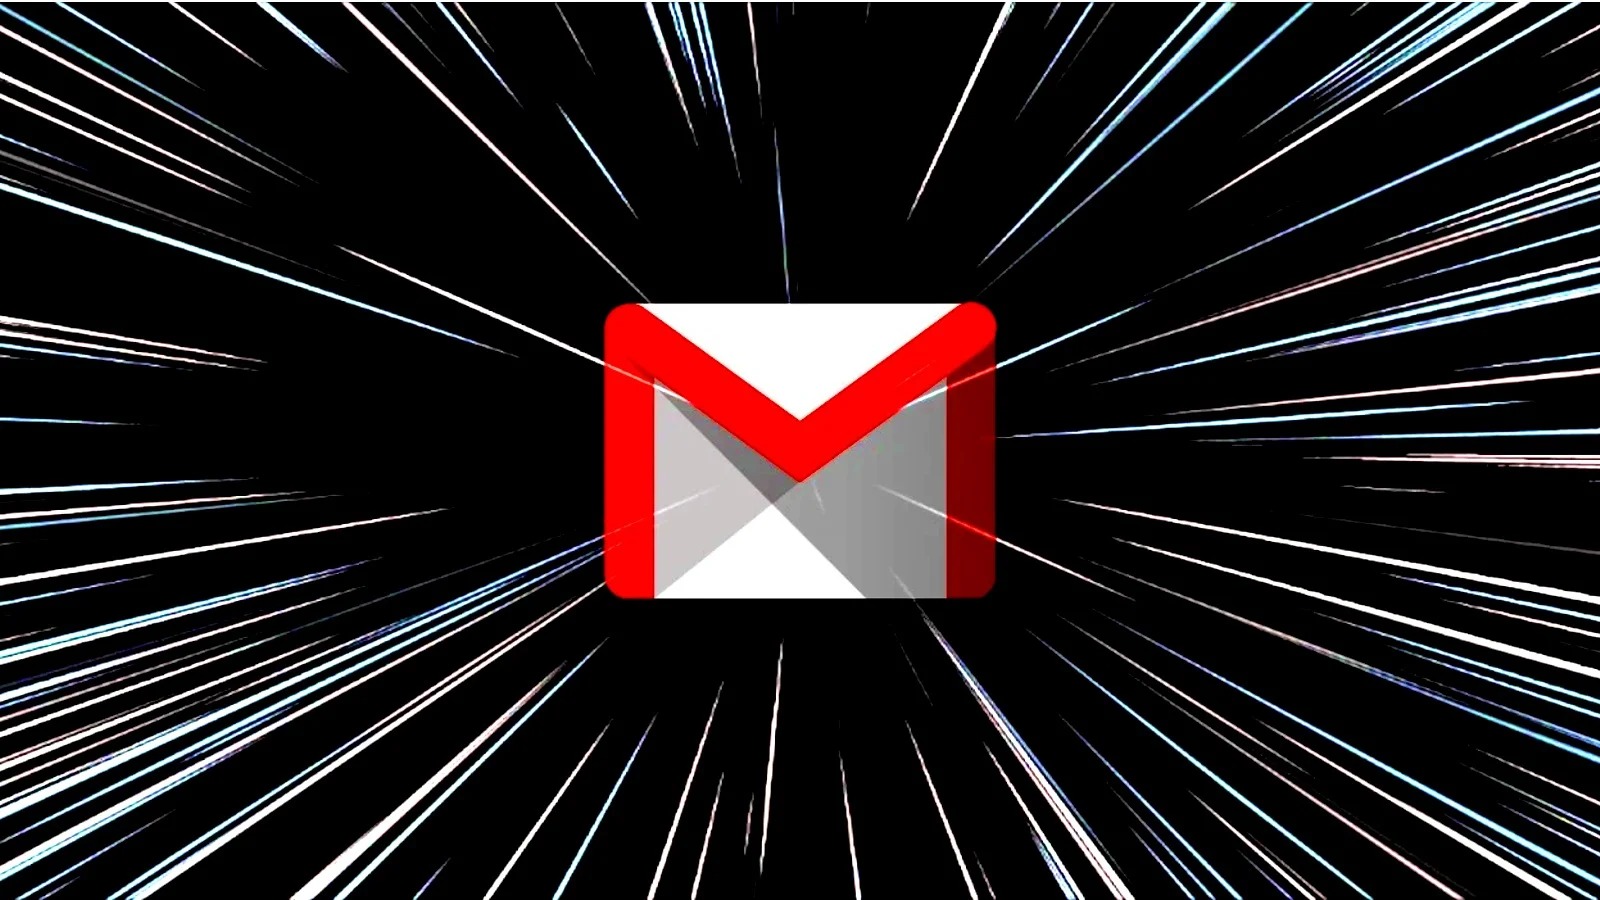 gmails-new-encryption-can-make-email-safer-heres-why-you-should-use-it